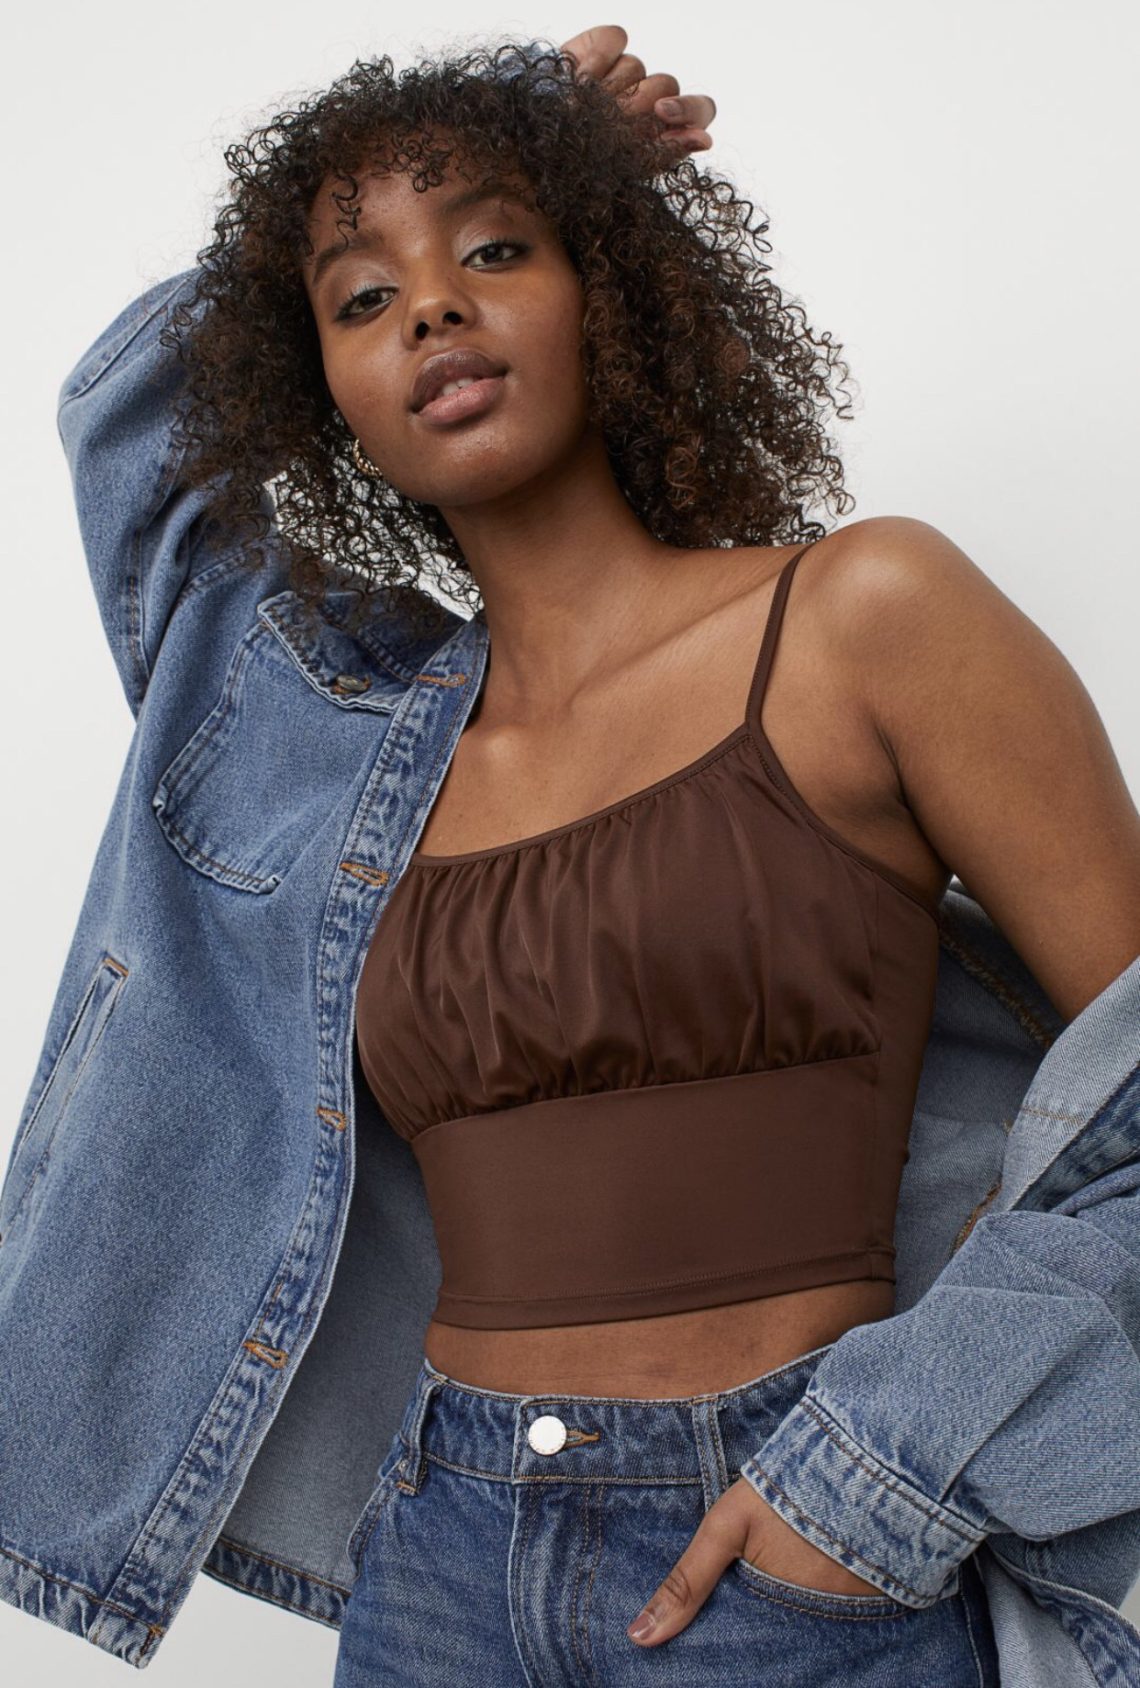 alt="10 H&M New Arrivals You Need To Check"